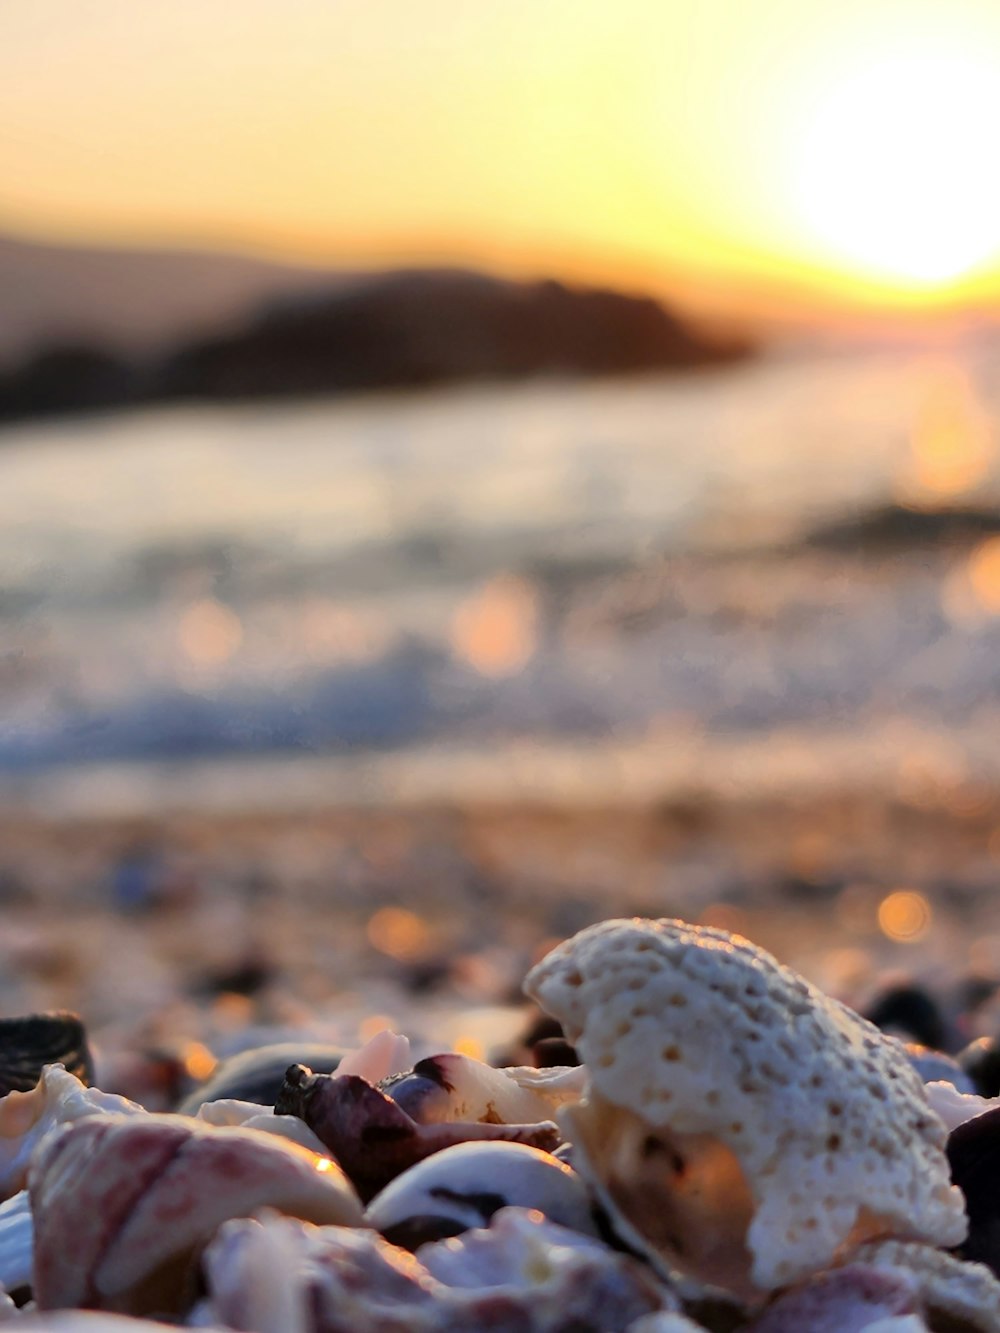 a close up of shells on a beach with the sun in the background